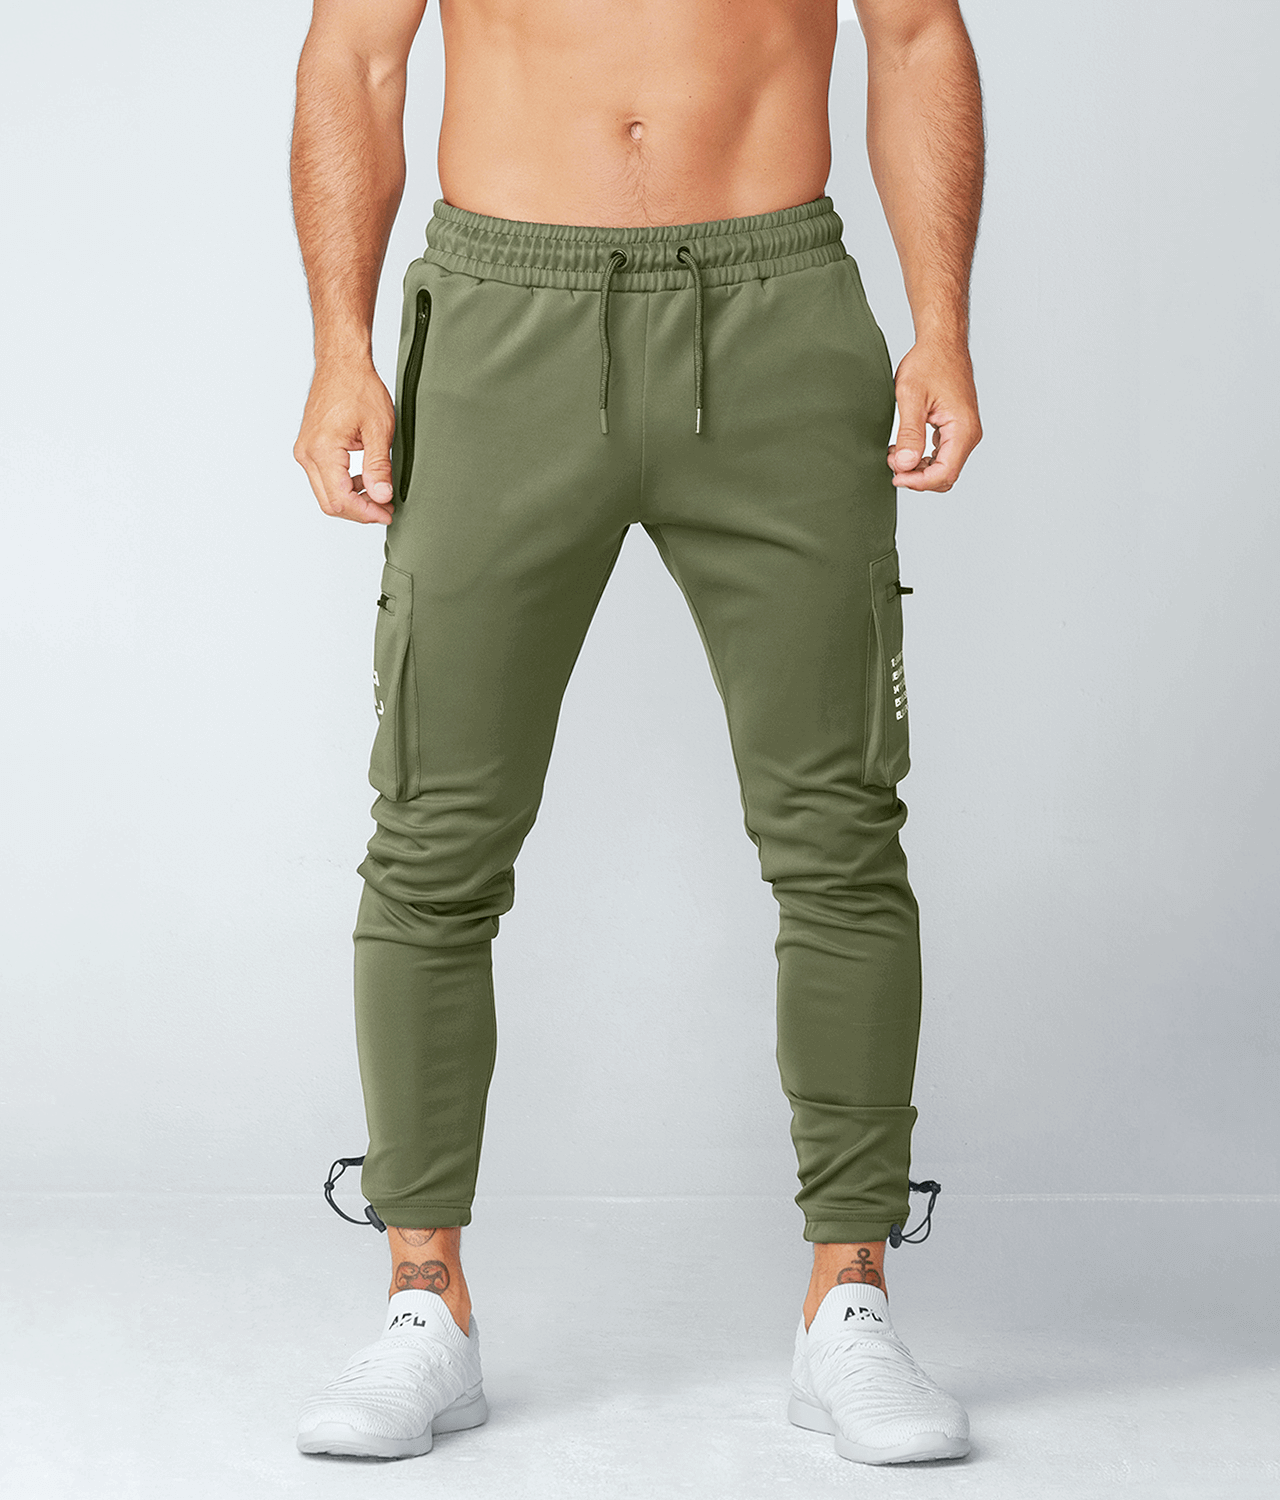 Born Tough Momentum Fitted Cargo Gym Workout Jogger Pants for Men Military Green XL